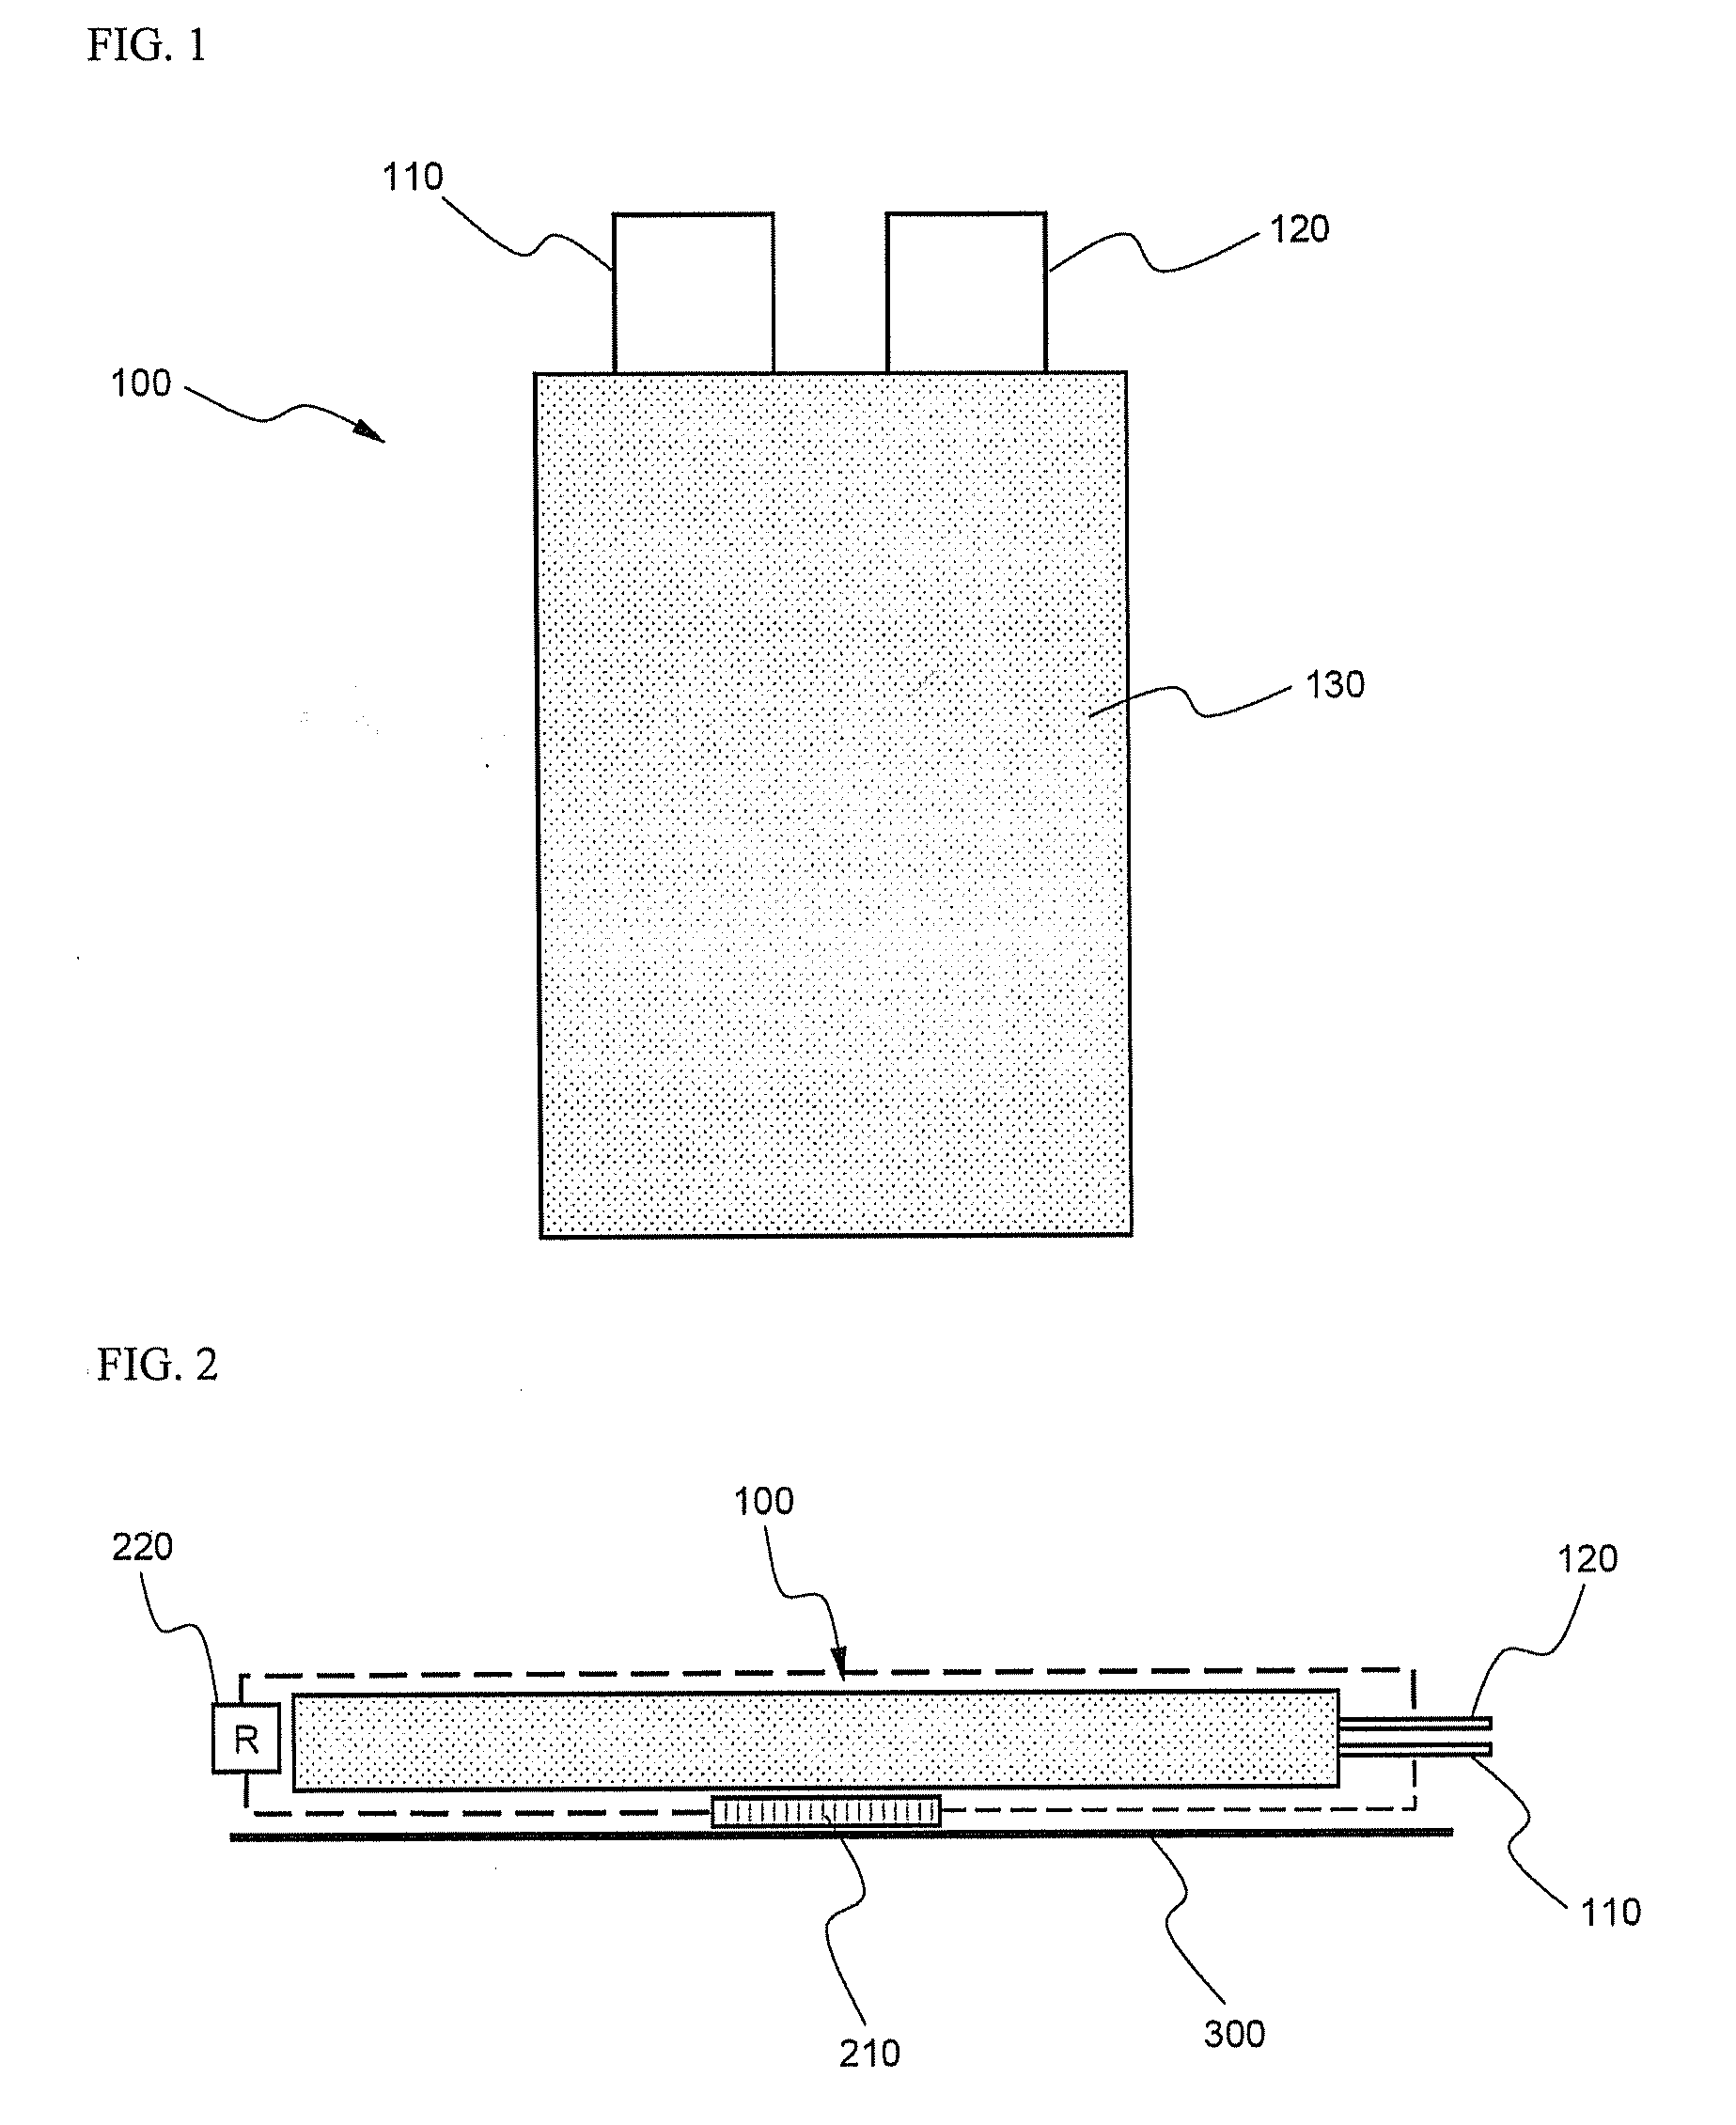 Secondary battery employing safety device